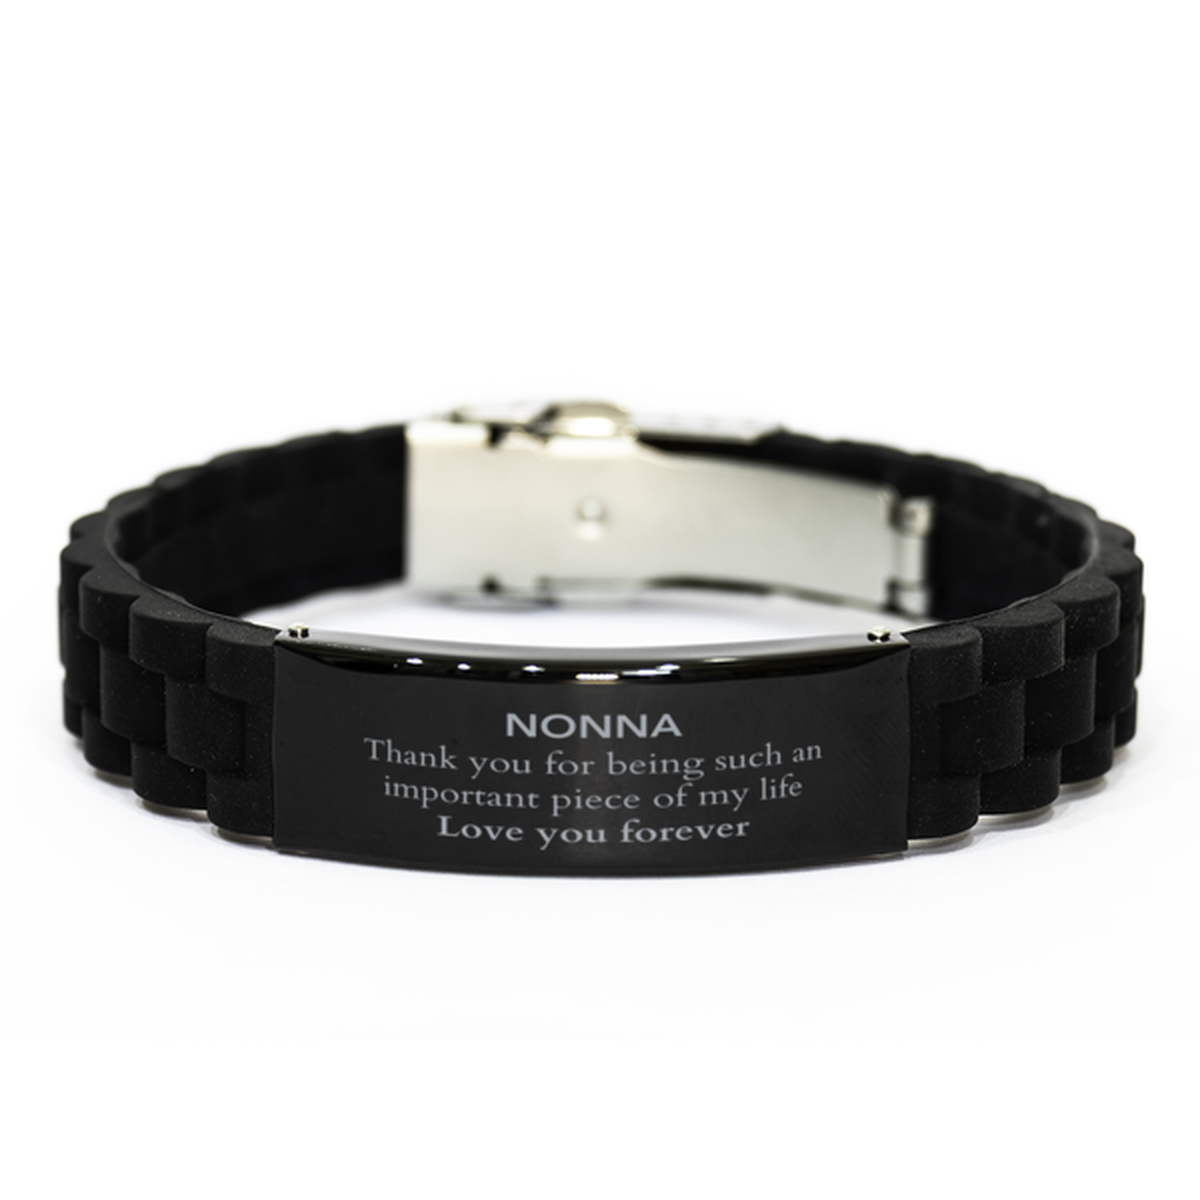 Appropriate Nonna Black Glidelock Clasp Bracelet Epic Birthday Gifts for Nonna Thank you for being such an important piece of my life Nonna Christmas Mothers Fathers Day